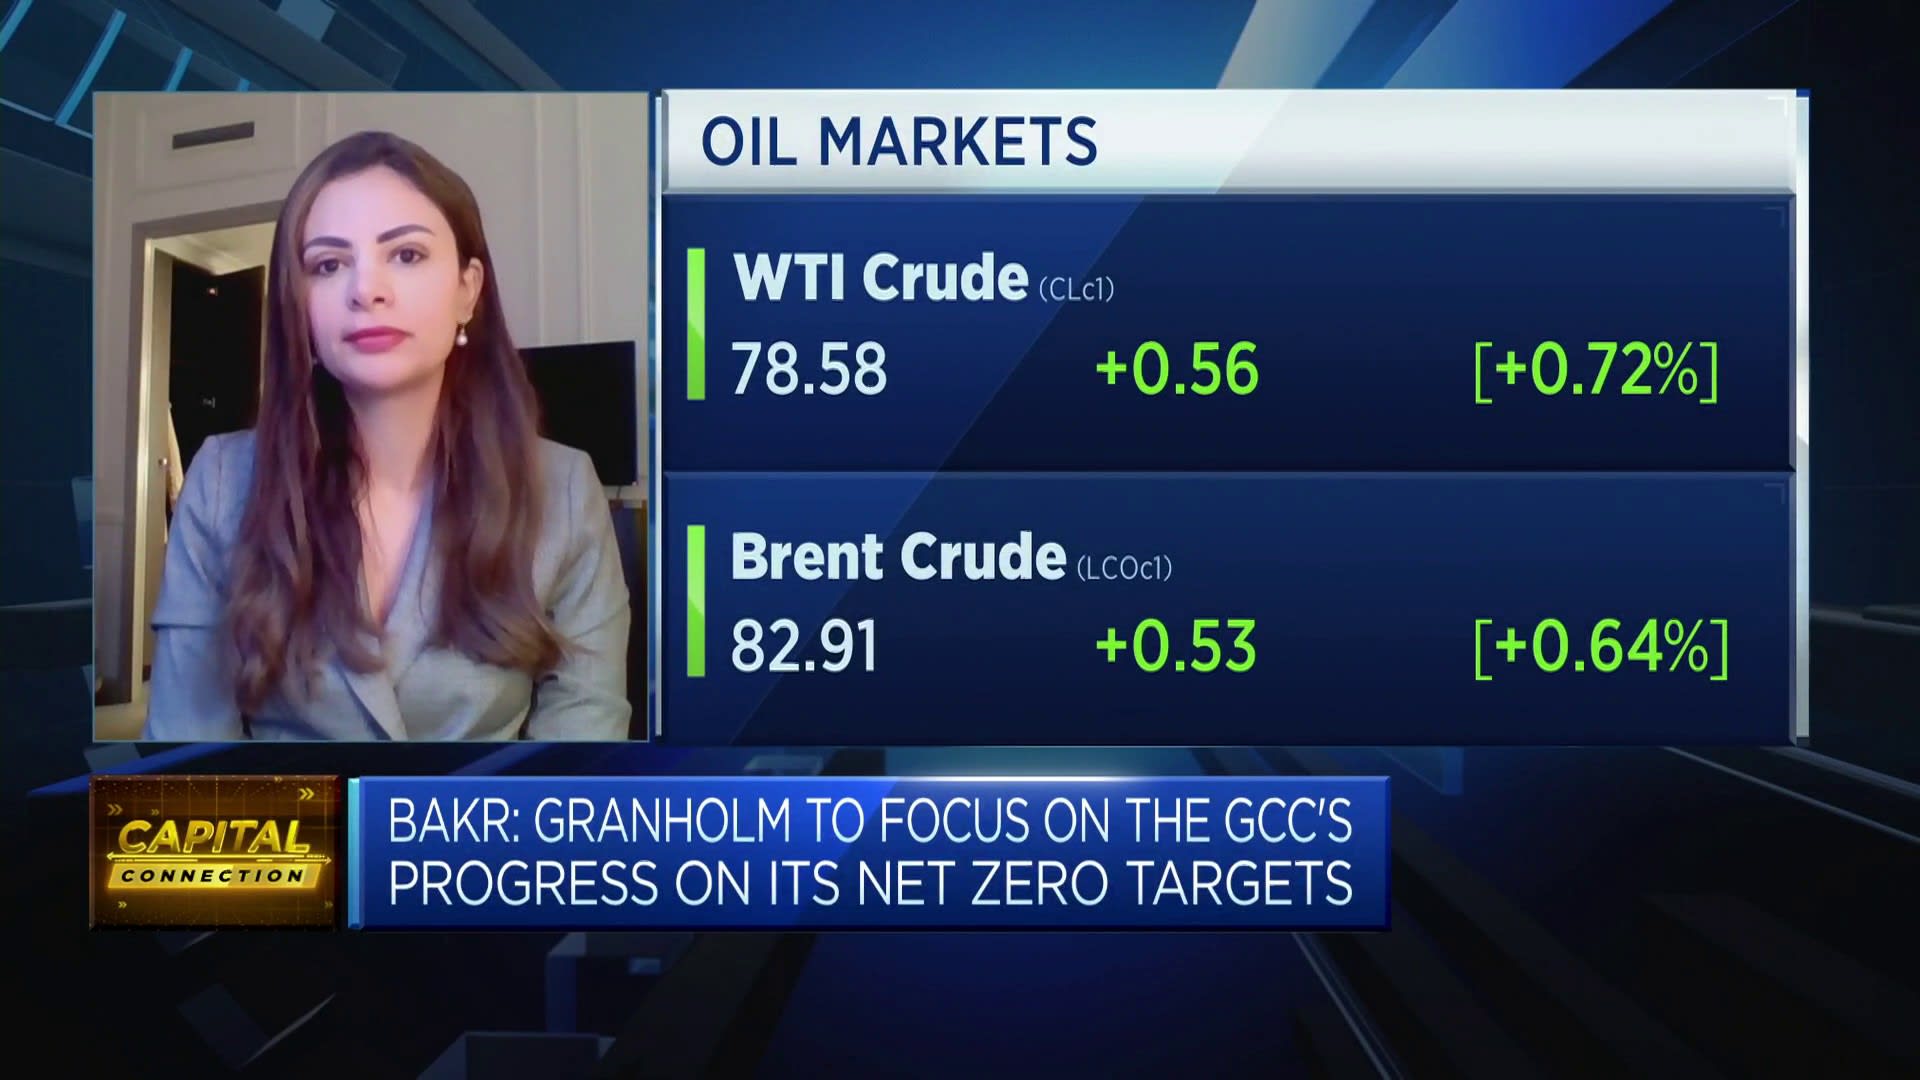 U.S. wants to keep lid on oil prices in election year: Analyst [Video]